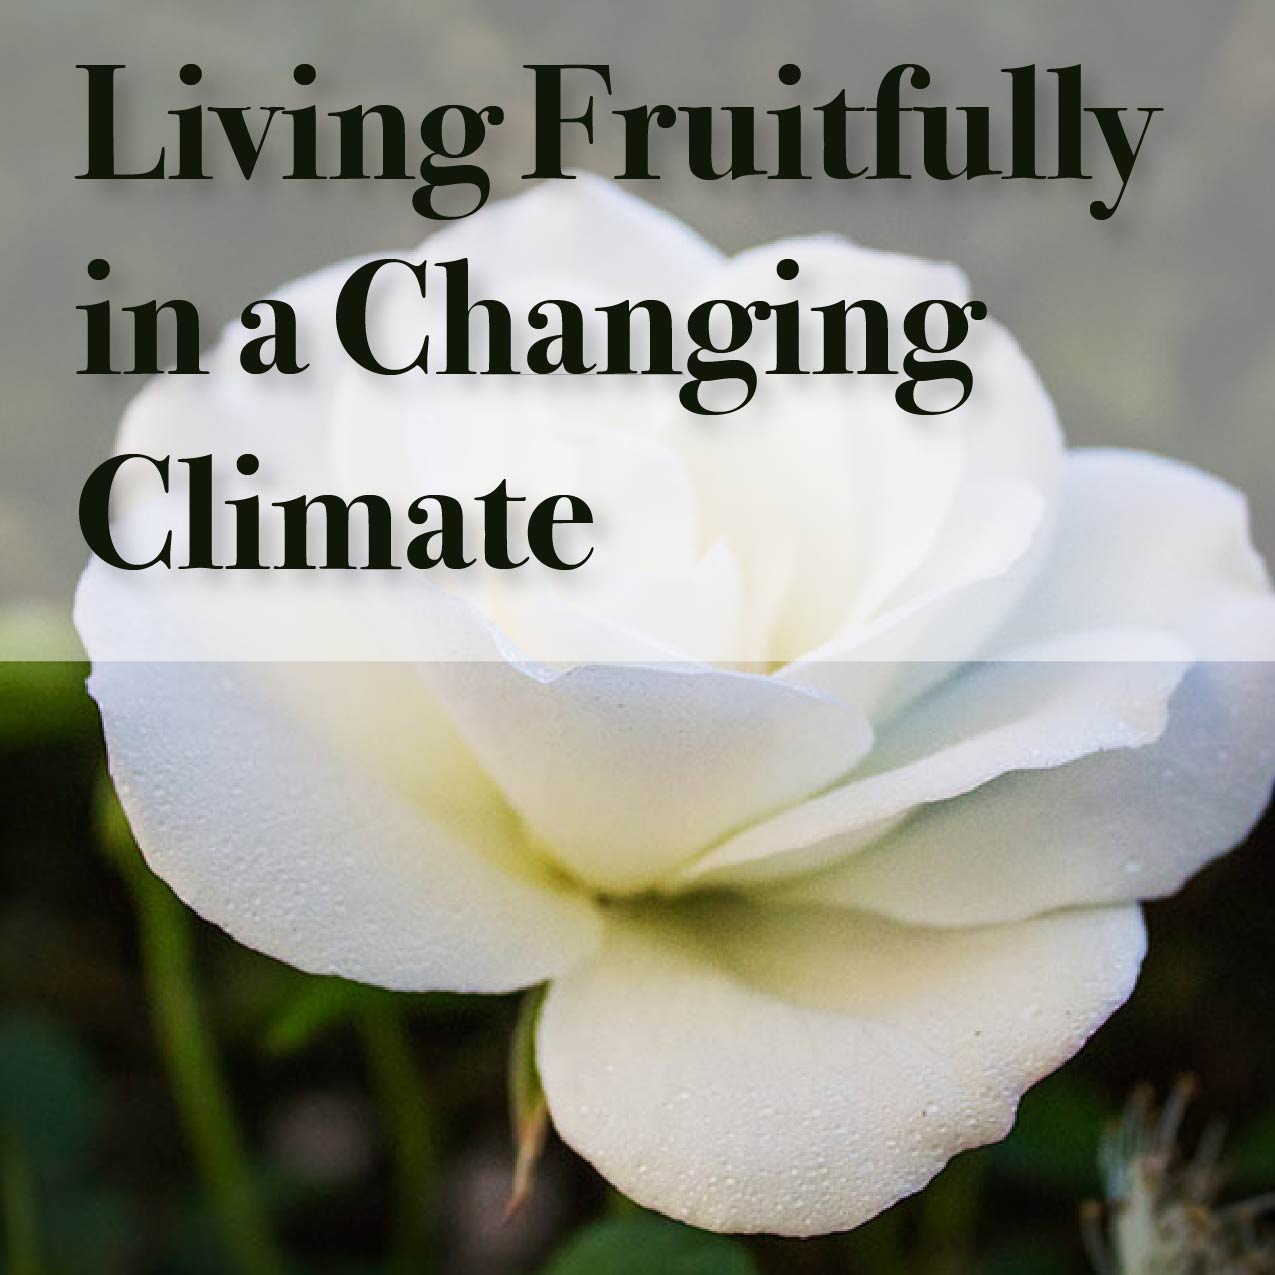 Living Fruitfully in a Changing Climate